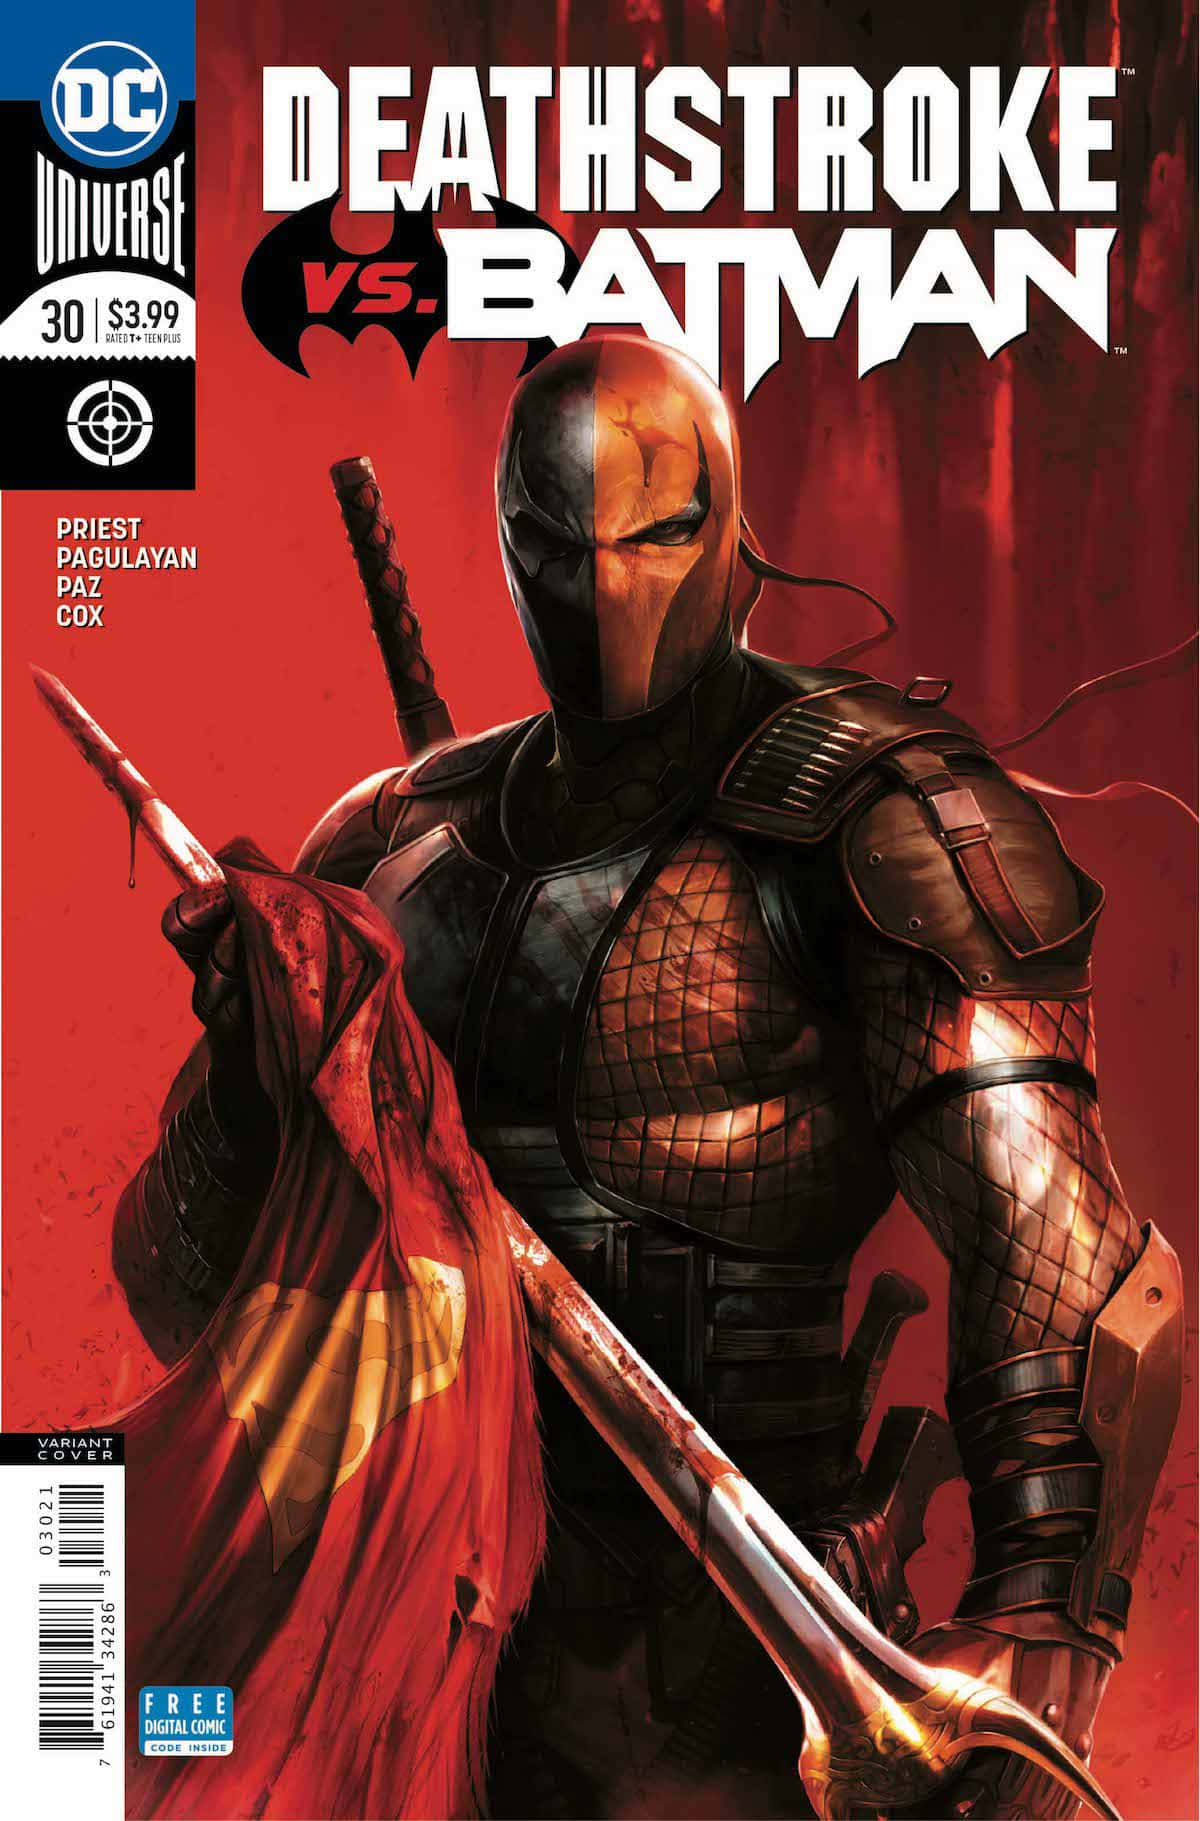 "Deathstroke: A Ruthless Mercenary with a Mission".